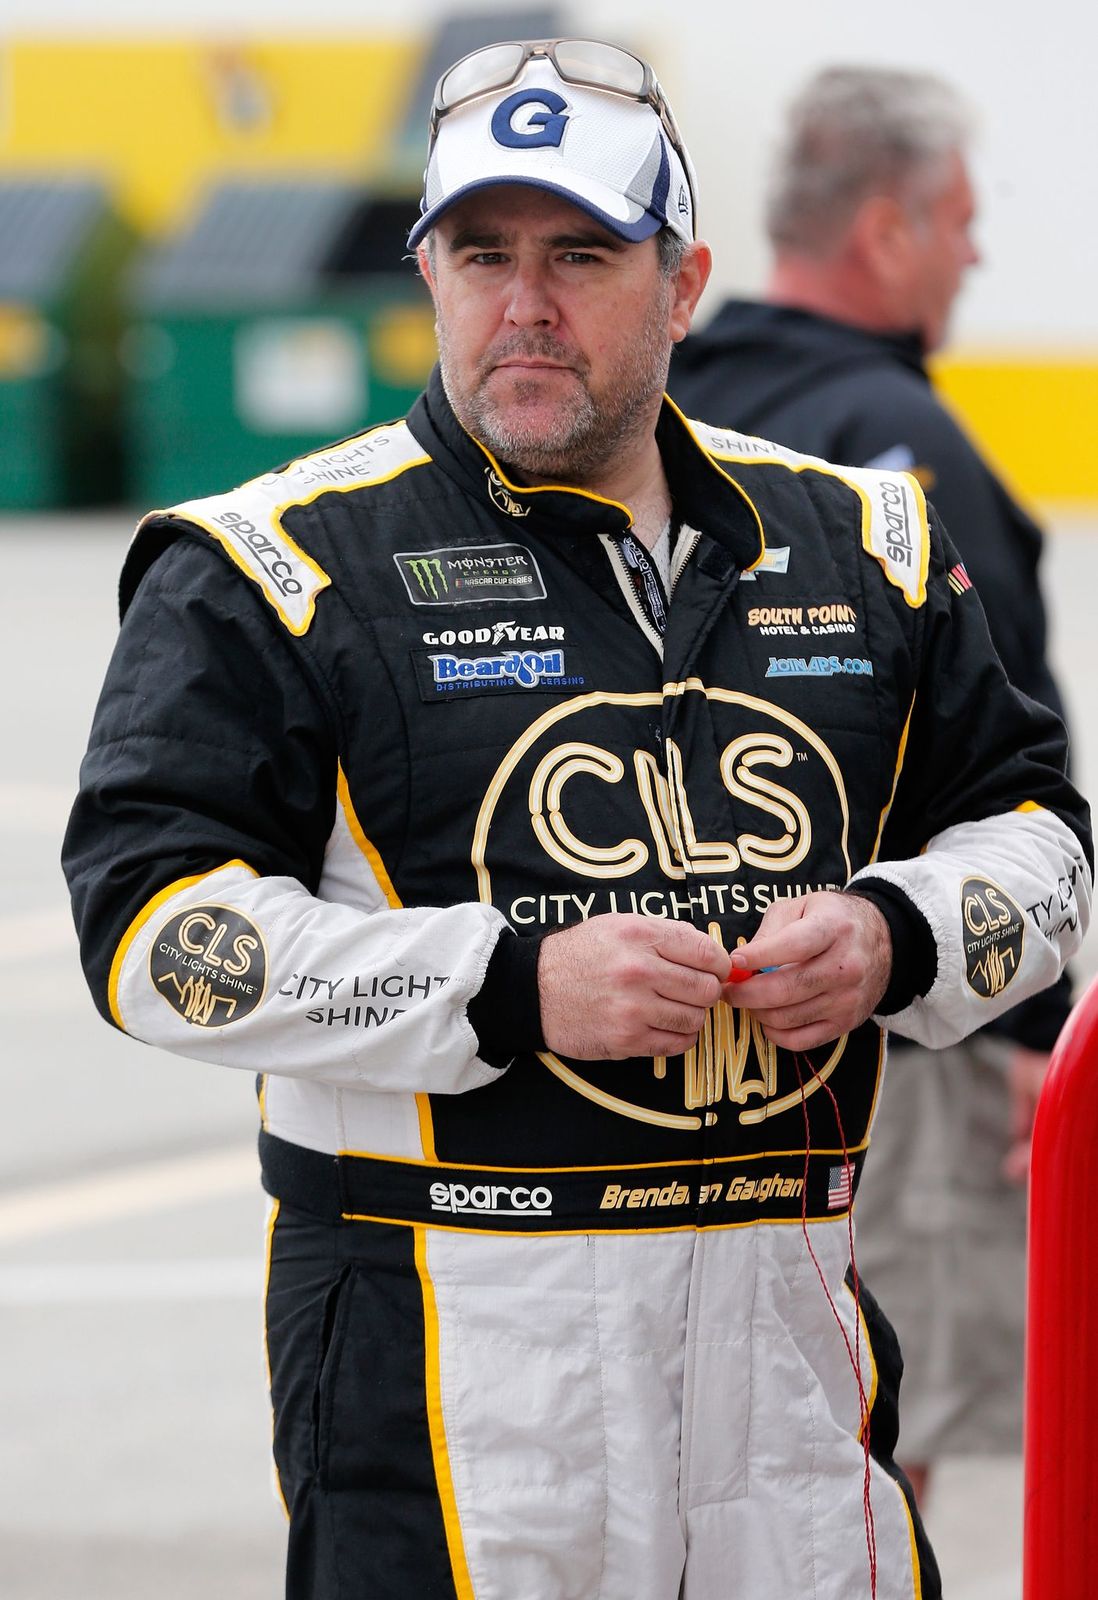 Brendan Gaughan, driver of the #62 Beard Oil Distributing/South Point Chevrolet, at practice for the Monster Energy NASCAR Cup Series 61st Annual Daytona 500 at Daytona International Speedway on February 9, 2019 | Photo: Getty Images